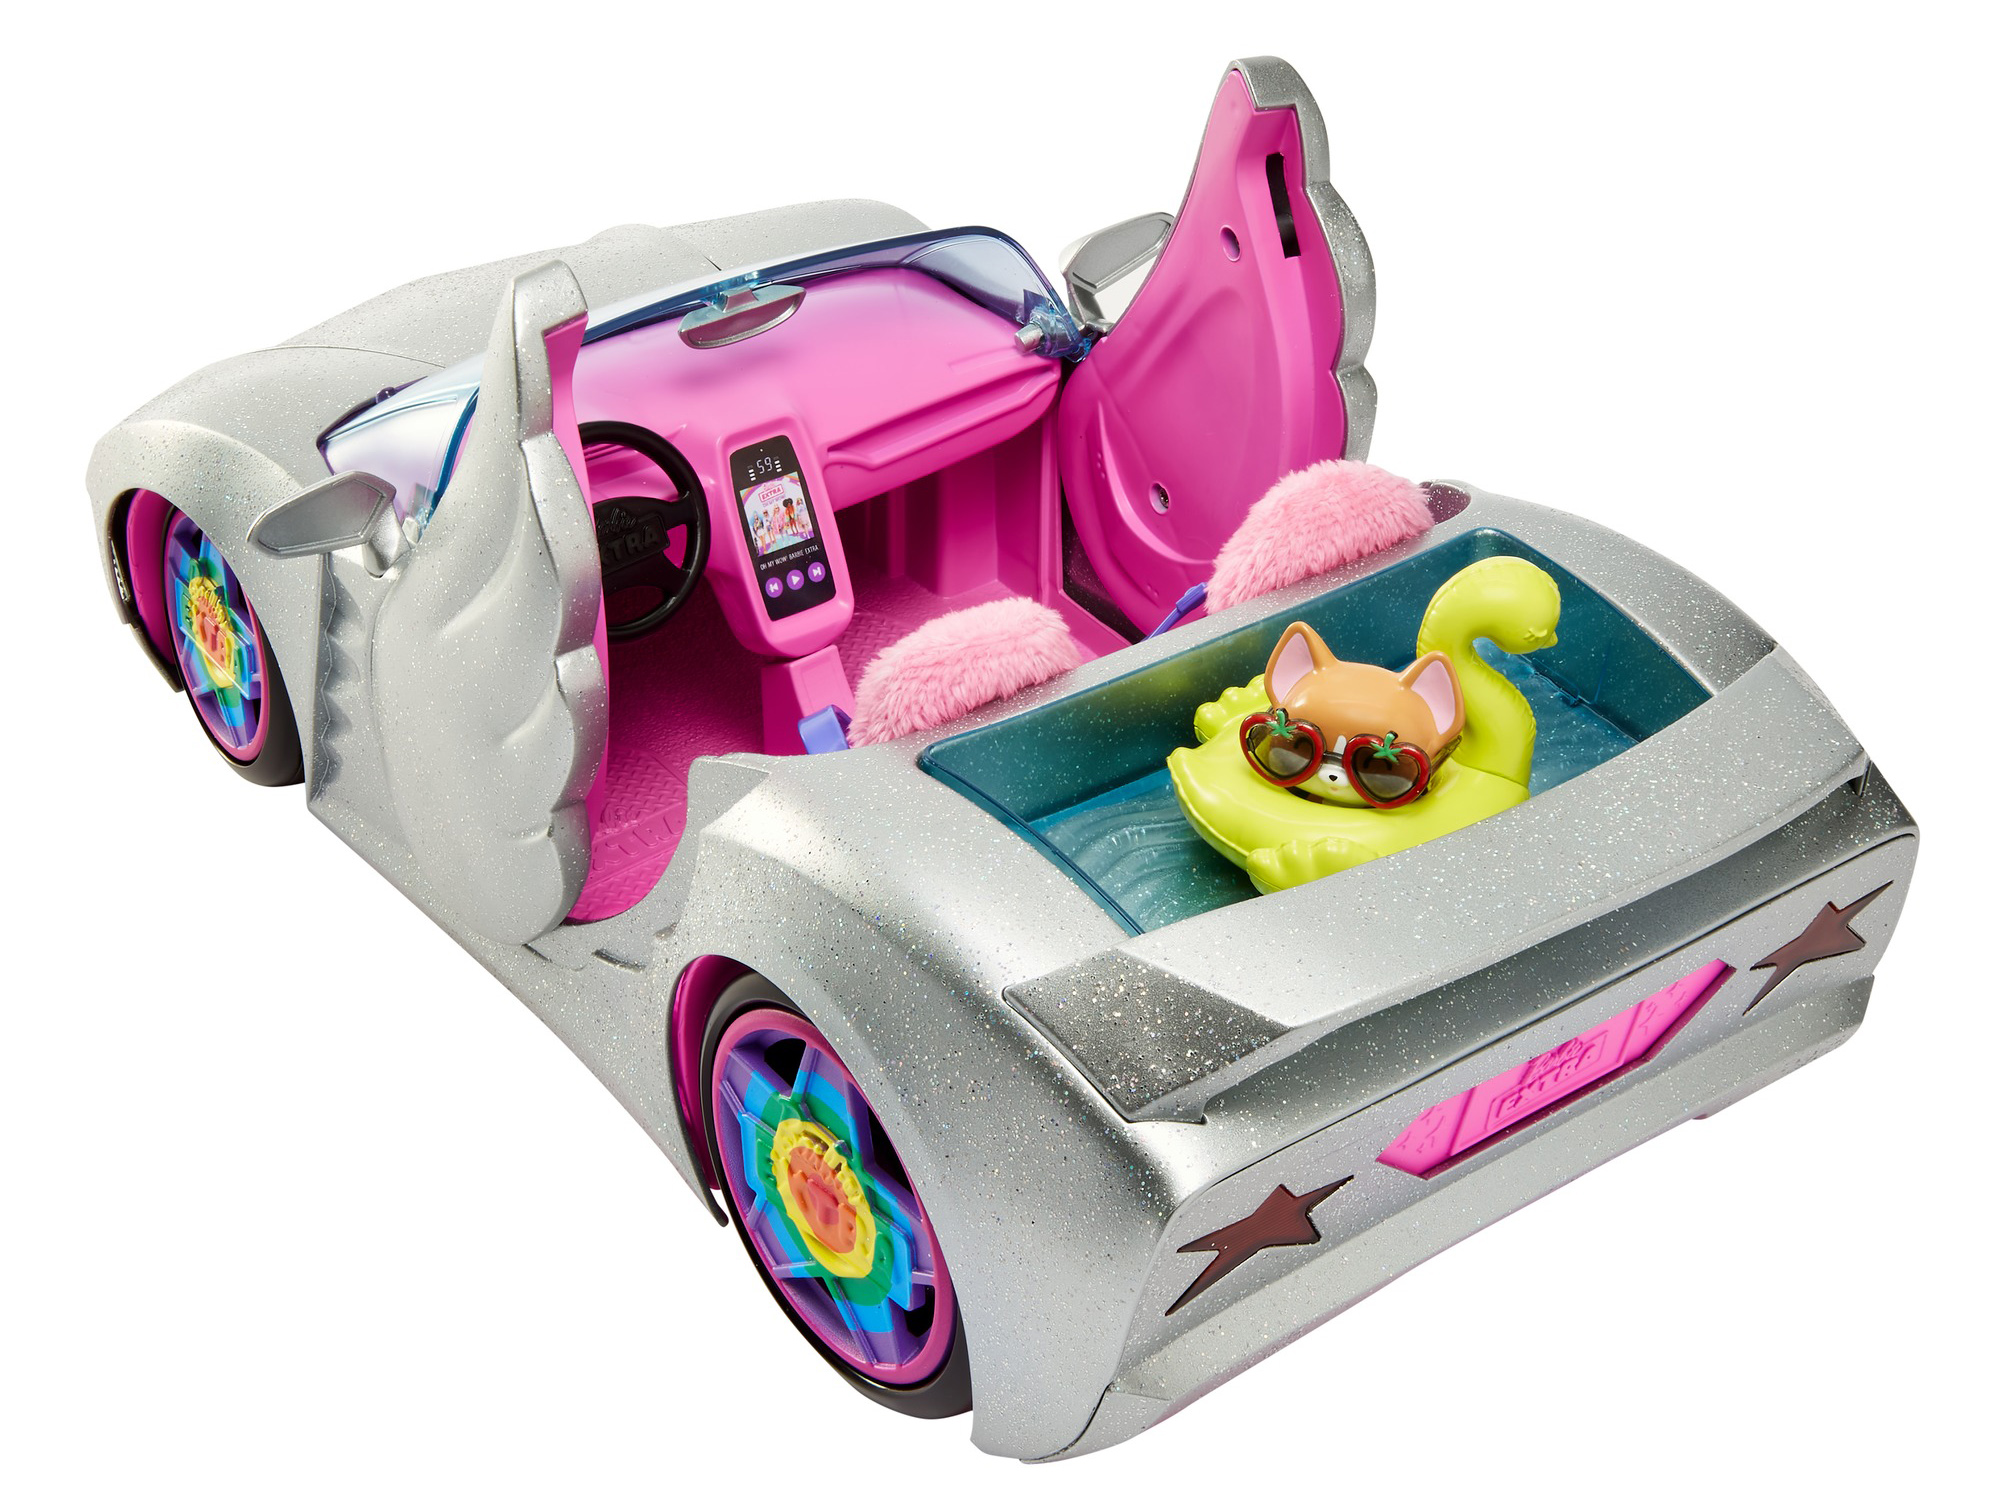 Barbie Car, Barbie Extra Set, Sparkly Silver 2-Seater Toy Convertible